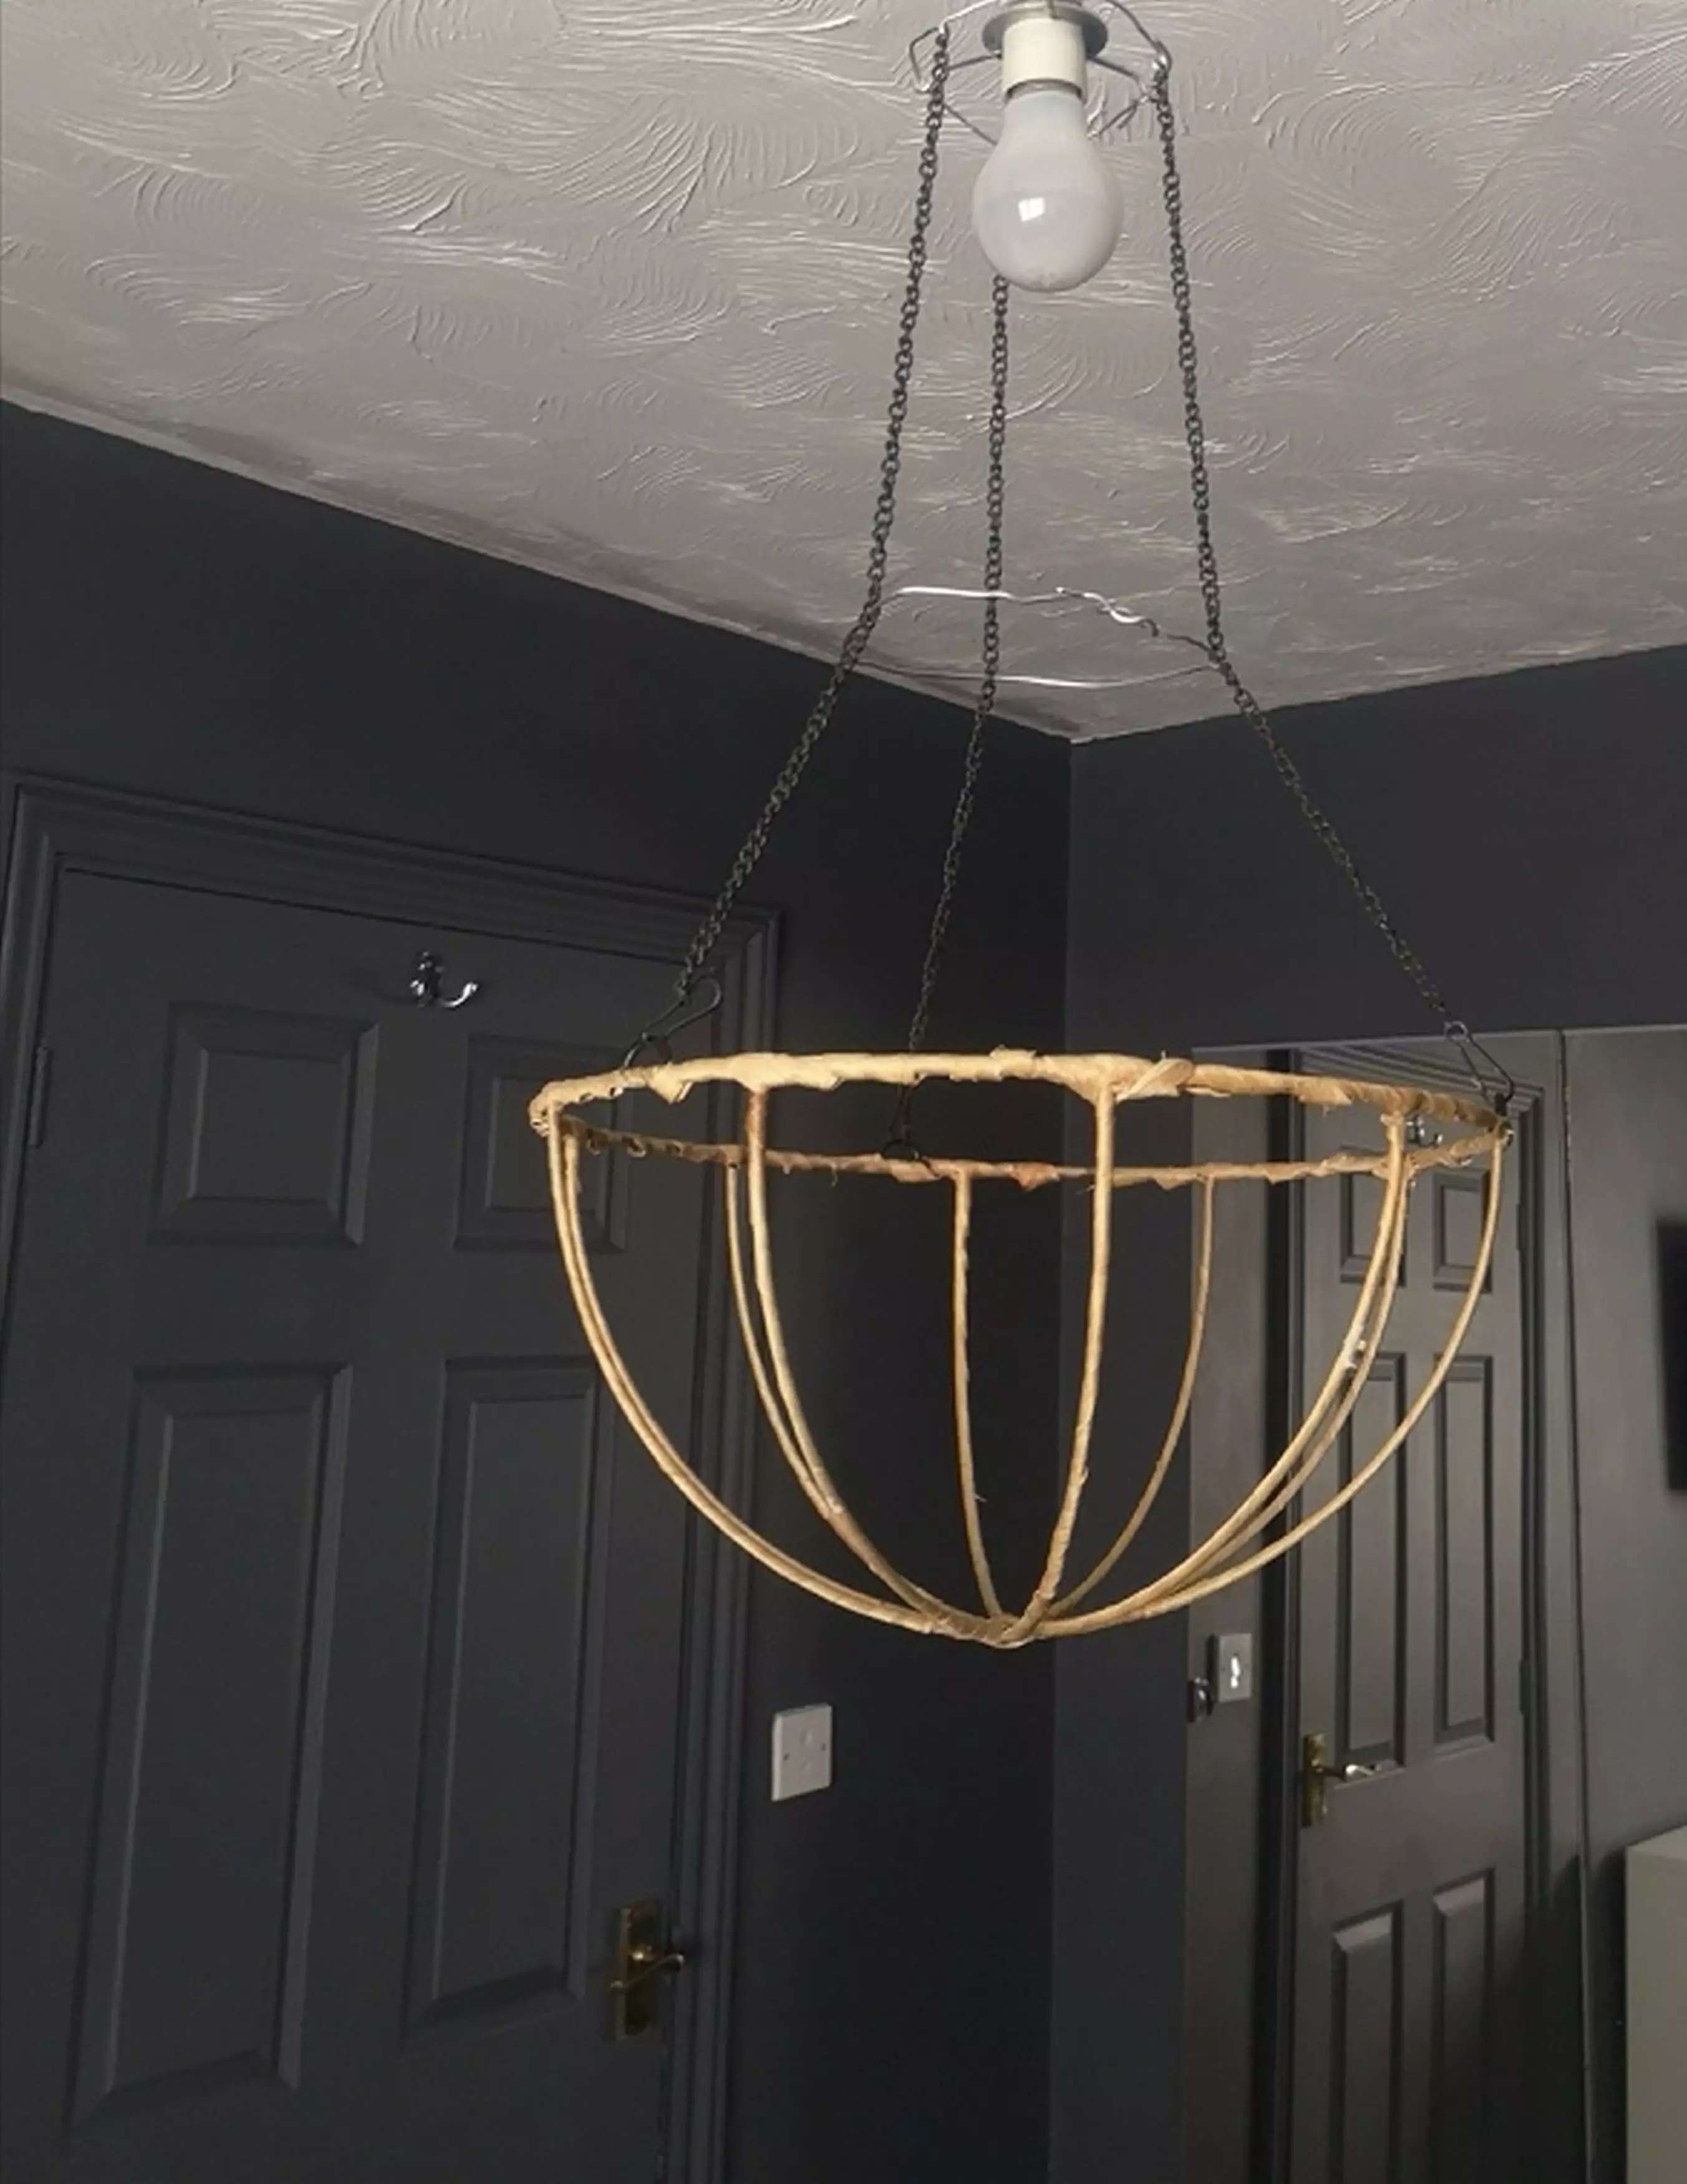 She began by creating a wire frame for her light fitting (